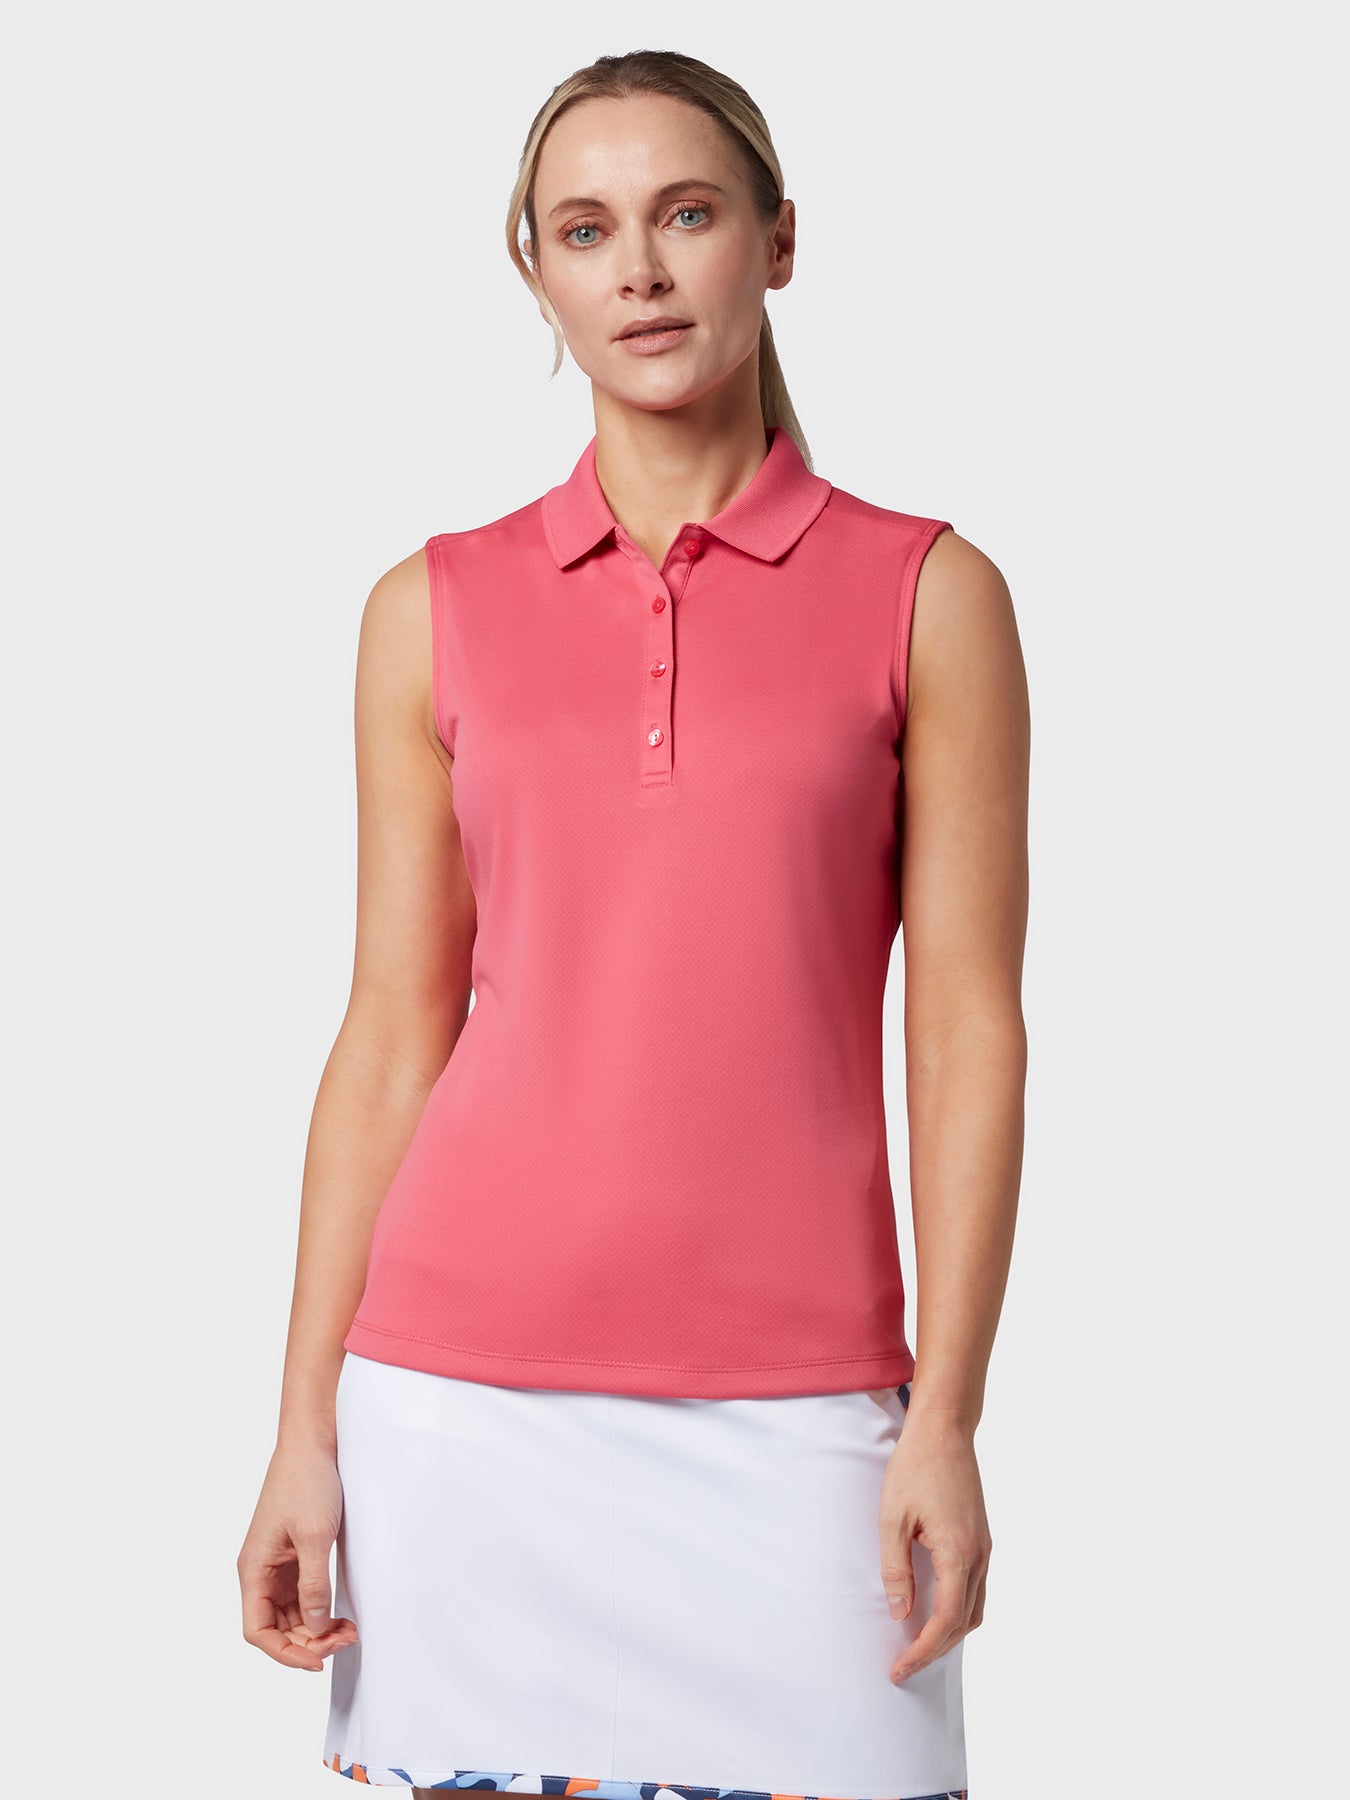 View Sleeveless Womens Polo In Fruit Dove Fruit Dove L information